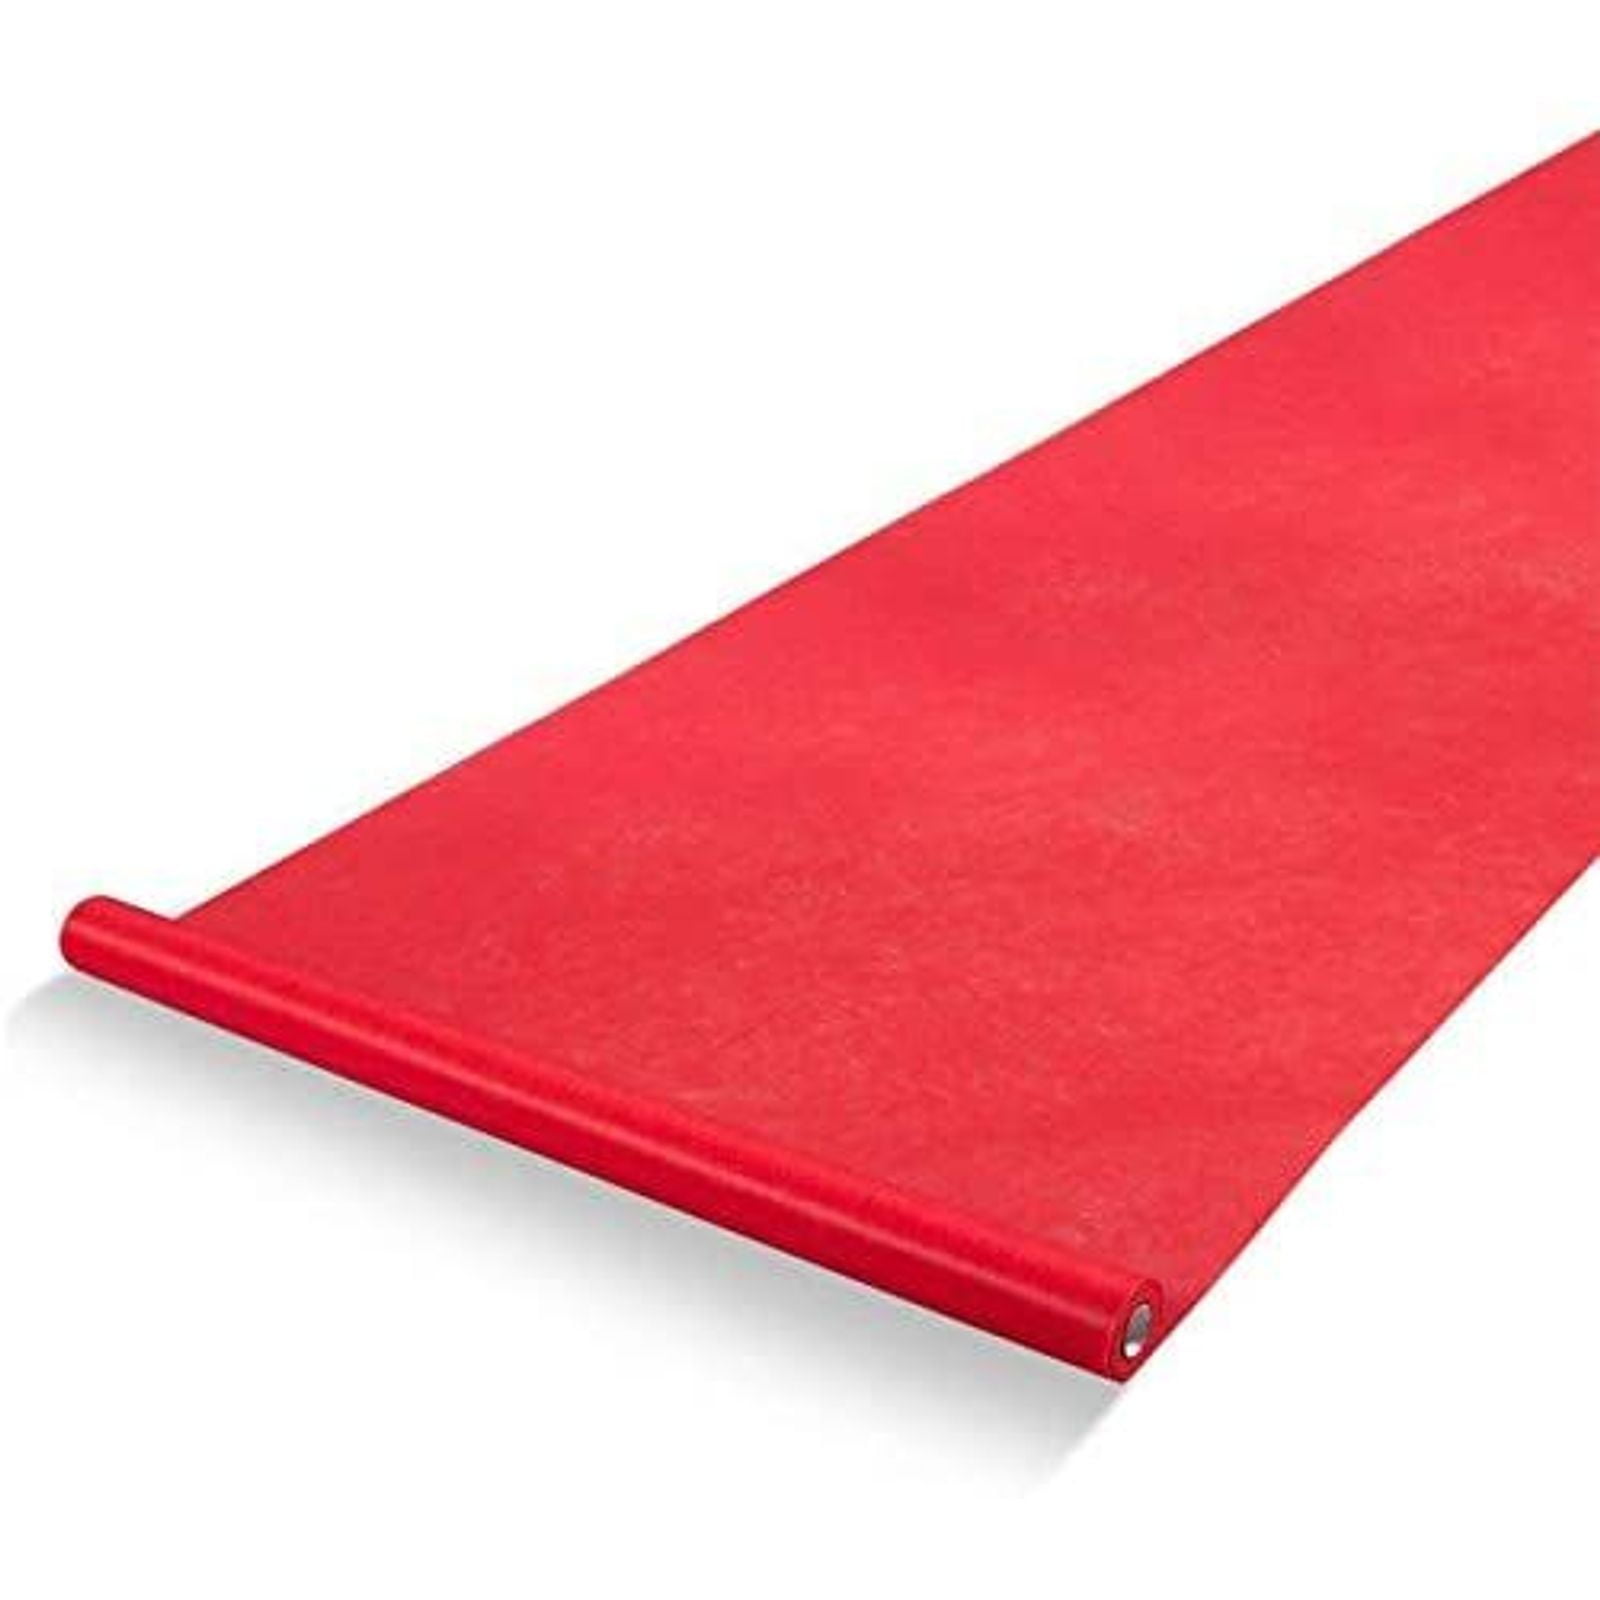 Red Carpet Aisle Floor Rug Party Decor Non-Slip Crowd Control Indoor/Outdoor Use 